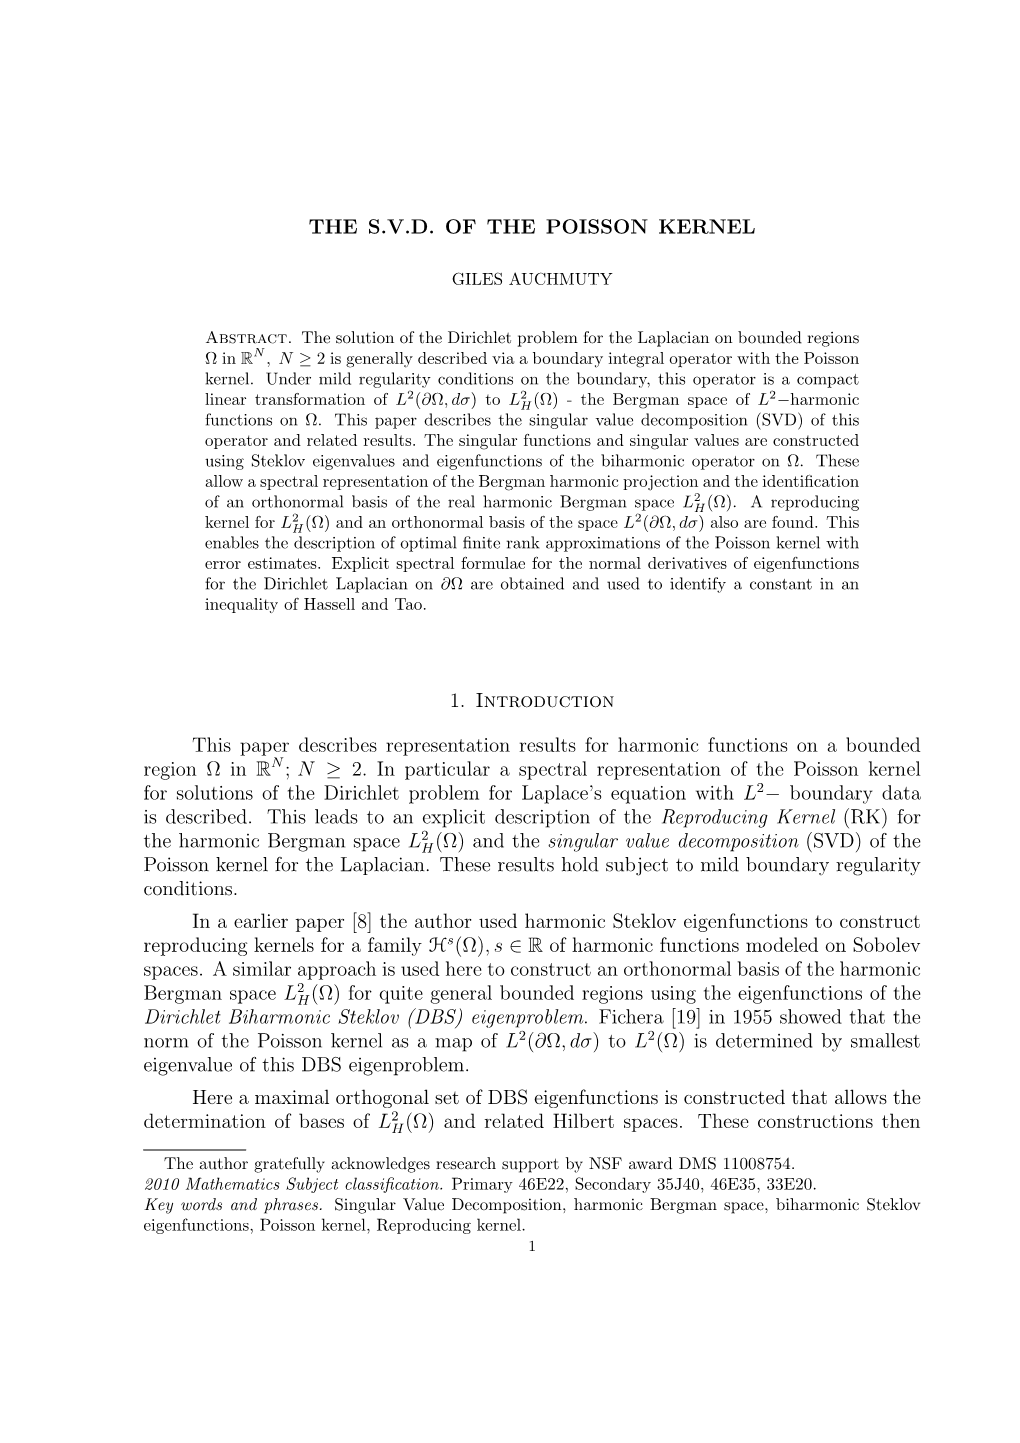 THE S.V.D. of the POISSON KERNEL 1. Introduction This Paper